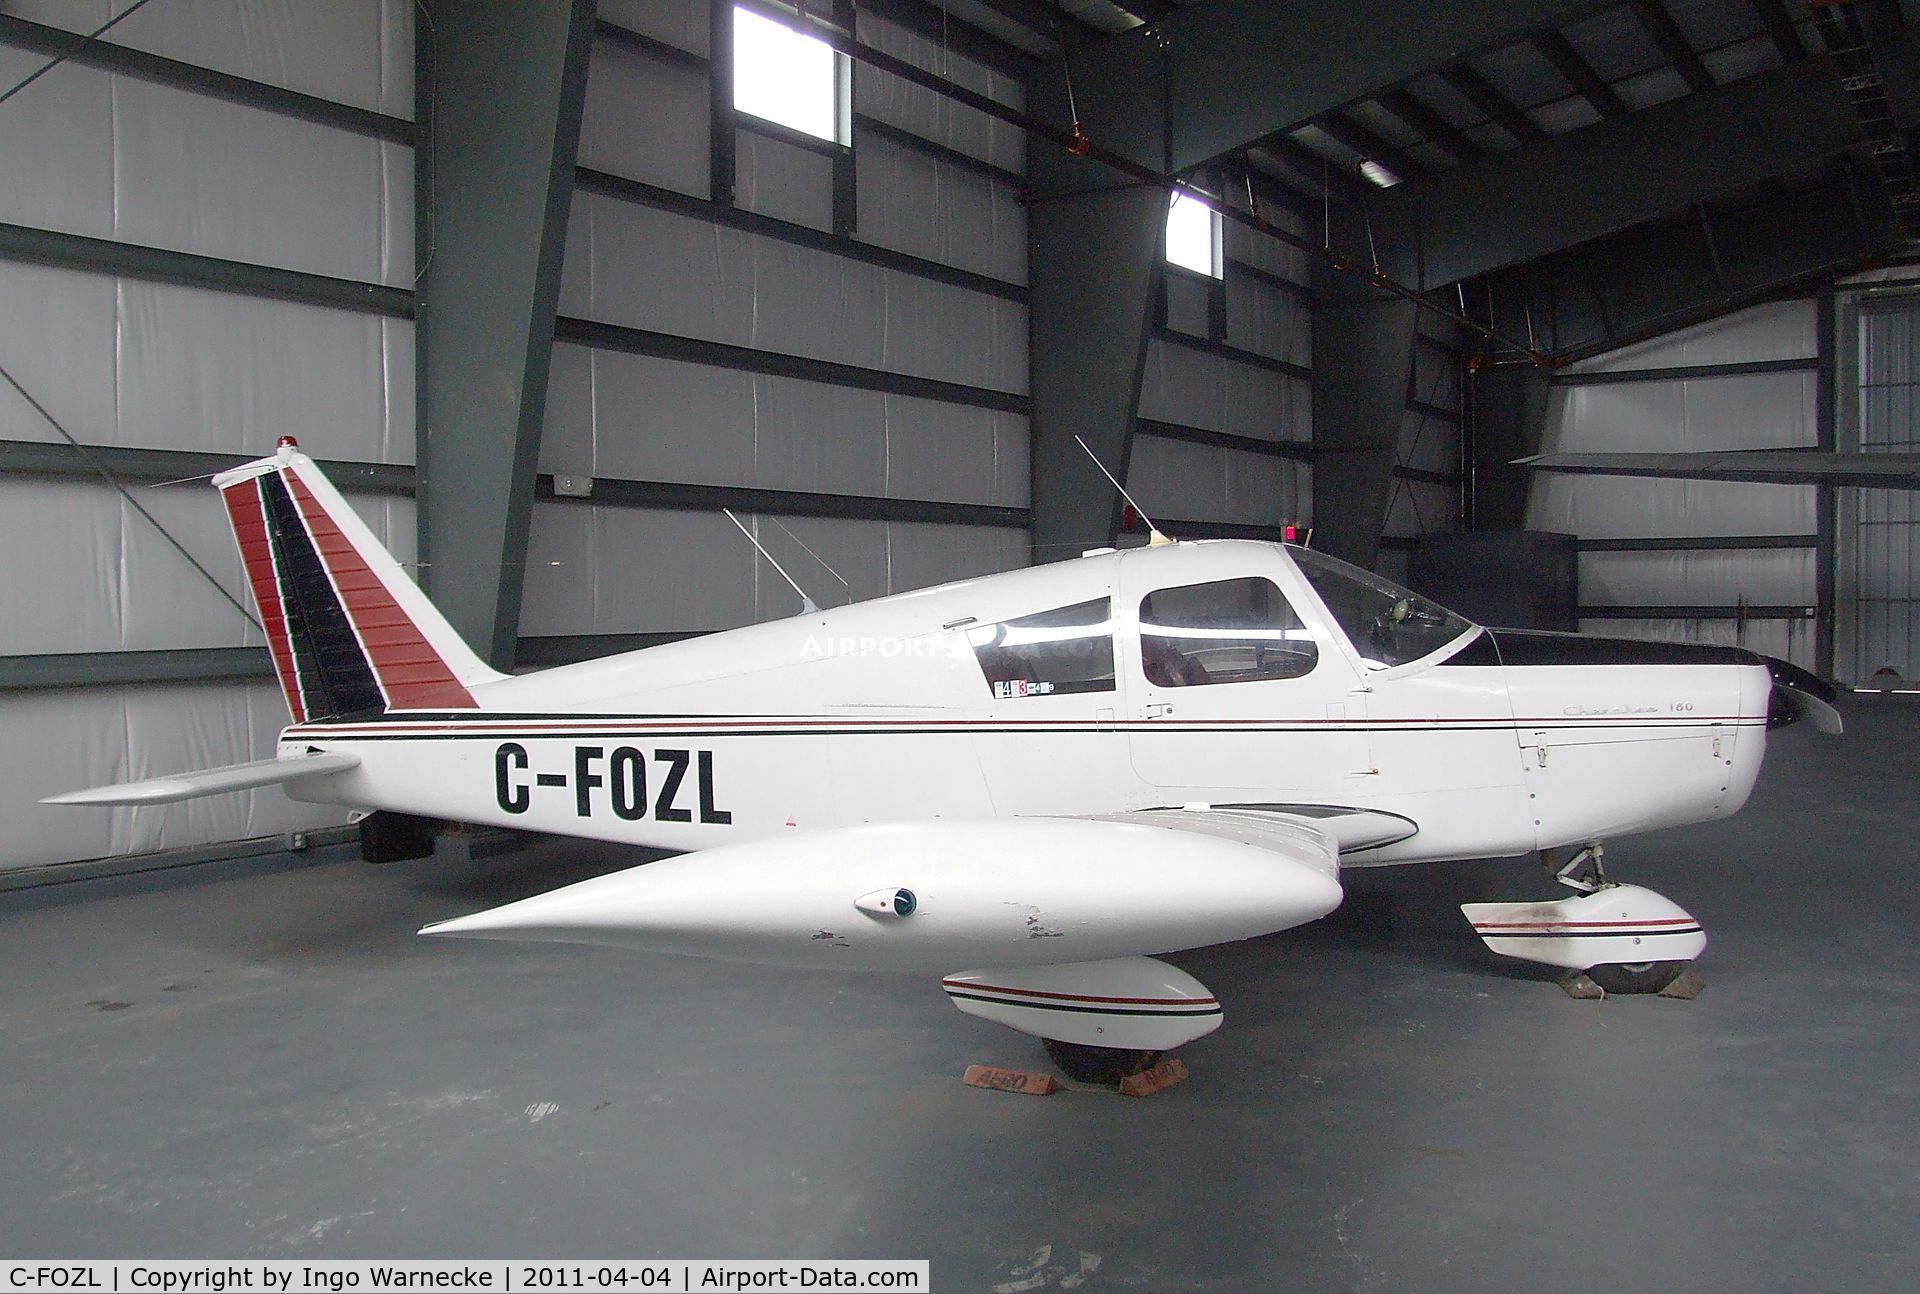 C-FOZL, 1963 Piper PA-28-180 C/N 28-1067, Piper PA-28-180 Cherokee 180 B in the Hangar of the British Columbia Aviation Museum, Sidney BC